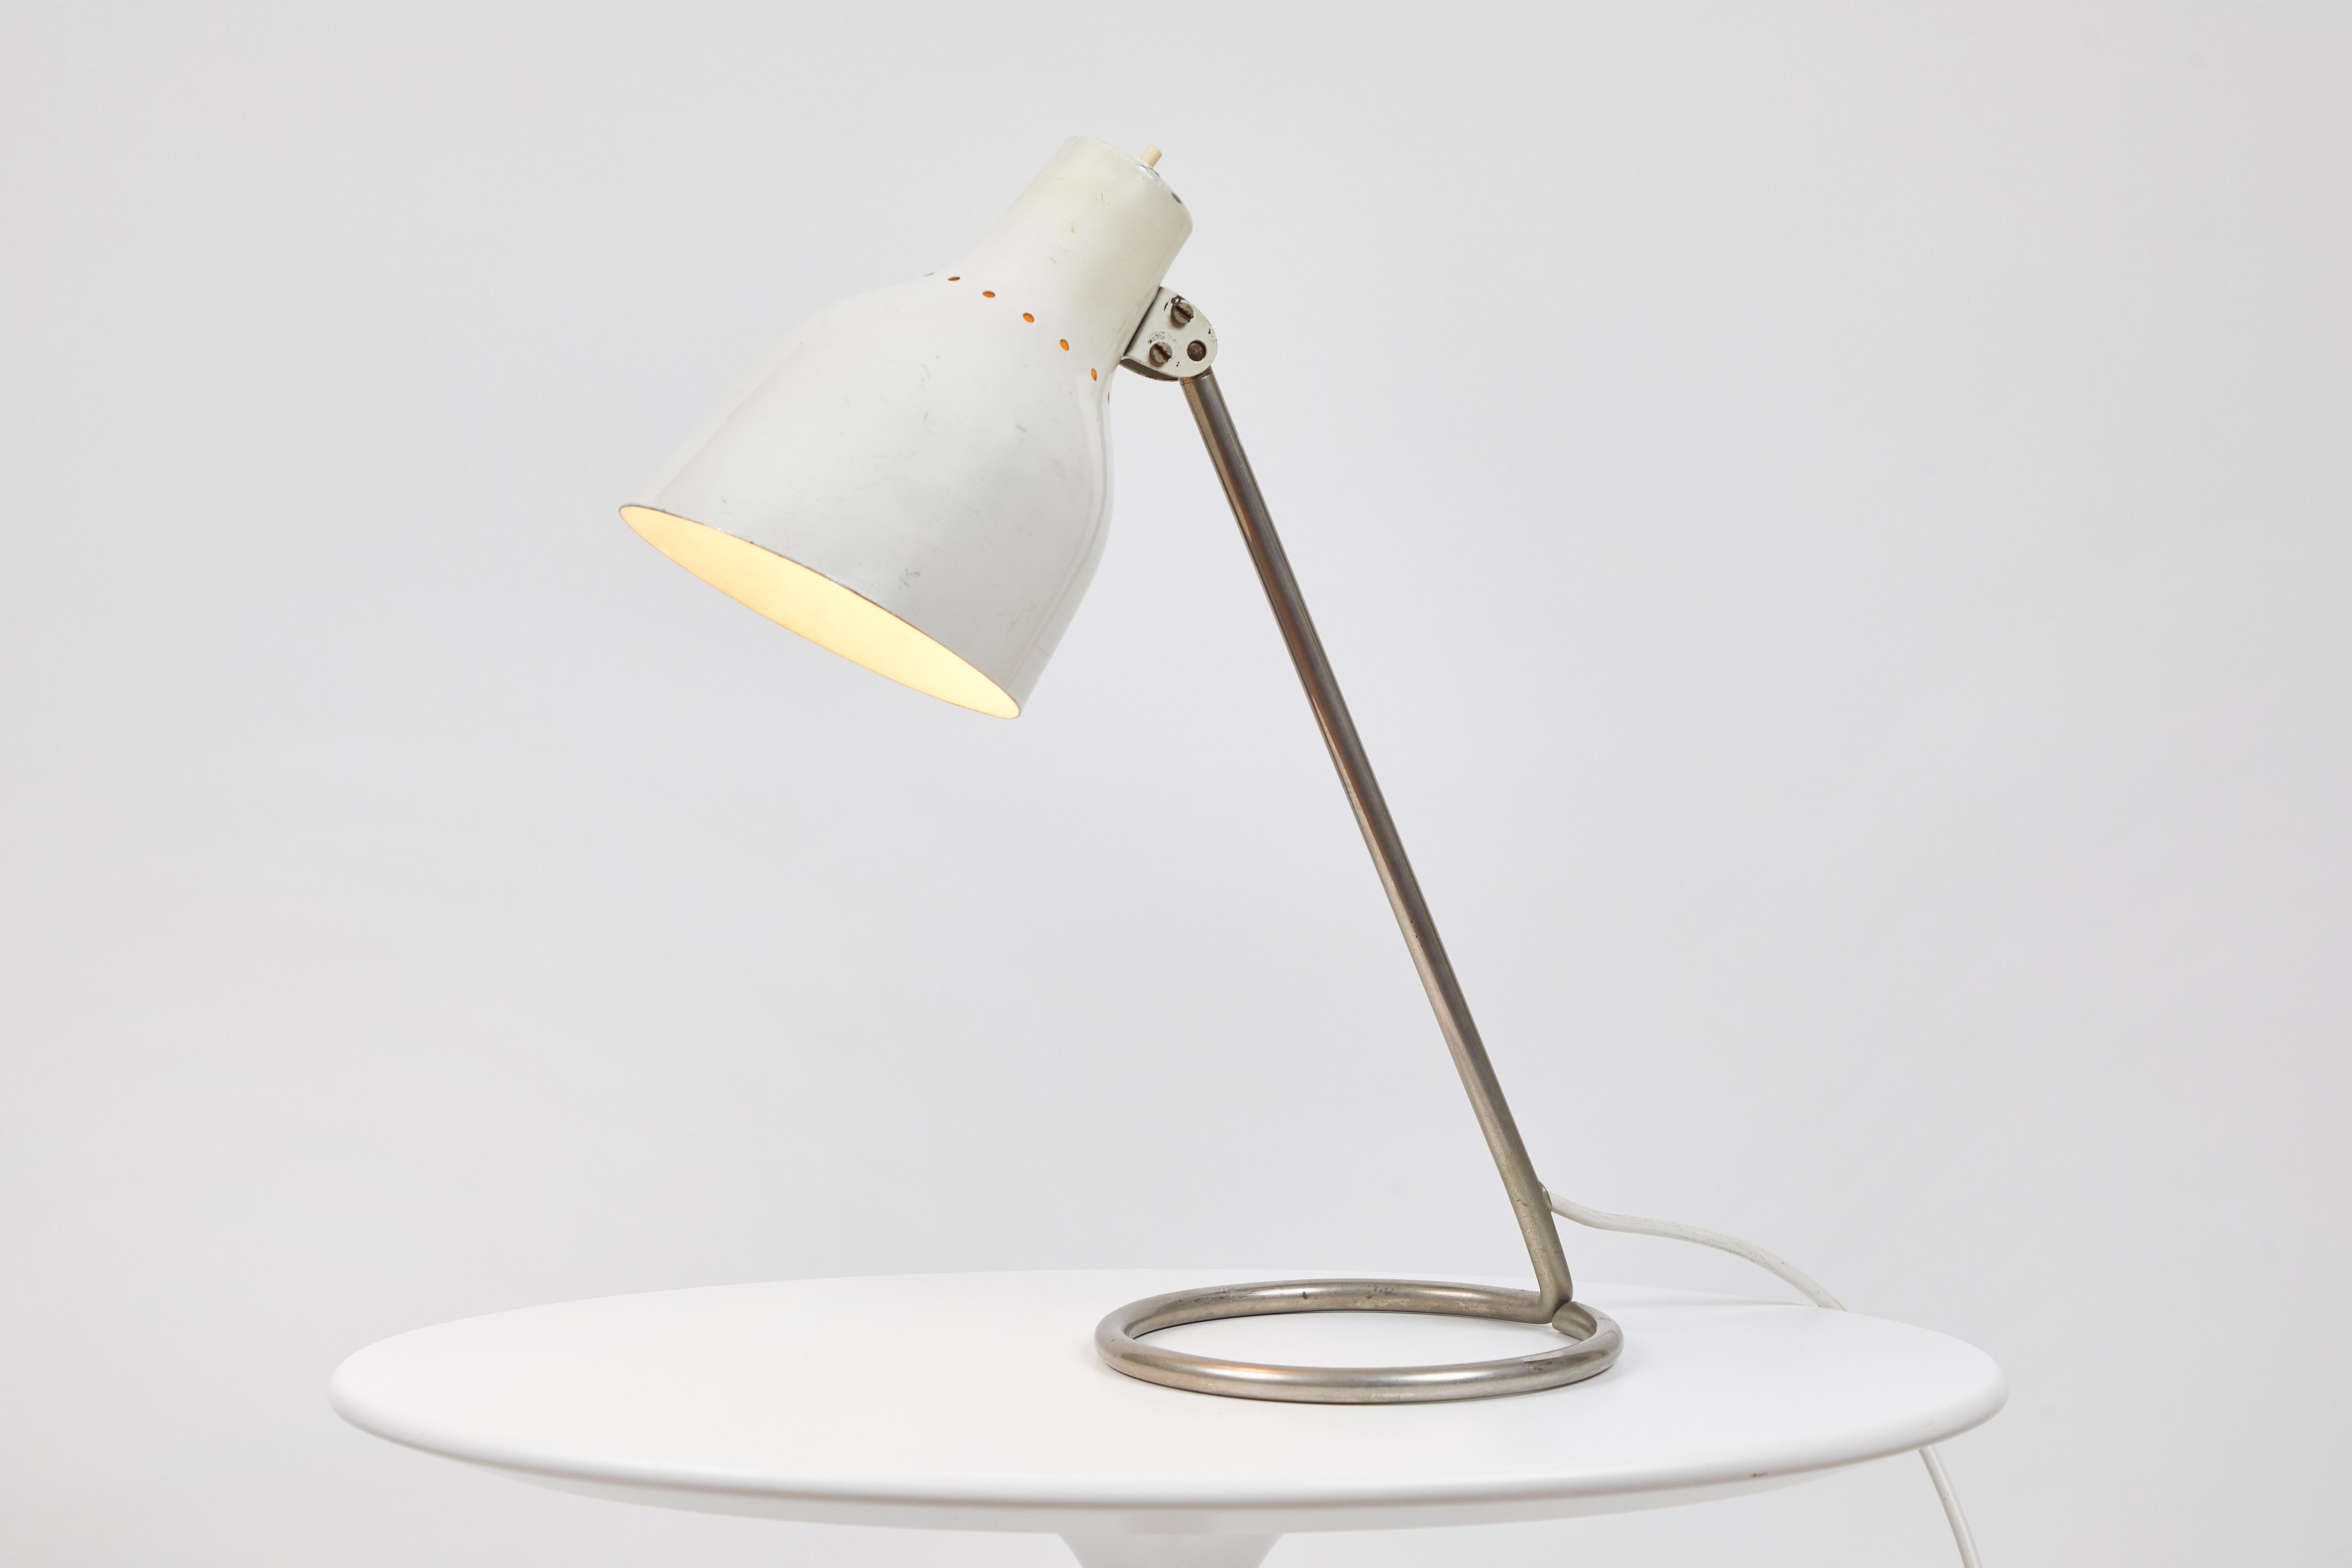 1960s BAG Turgi white table lamp. Executed in white enameled metal and nickel or steel. Shade adjusts left/right and up/down. Reminiscent of the refined Minimalist designs of Tito Agnoli for O-Luce.

Not UL listed, but recommended UL listing